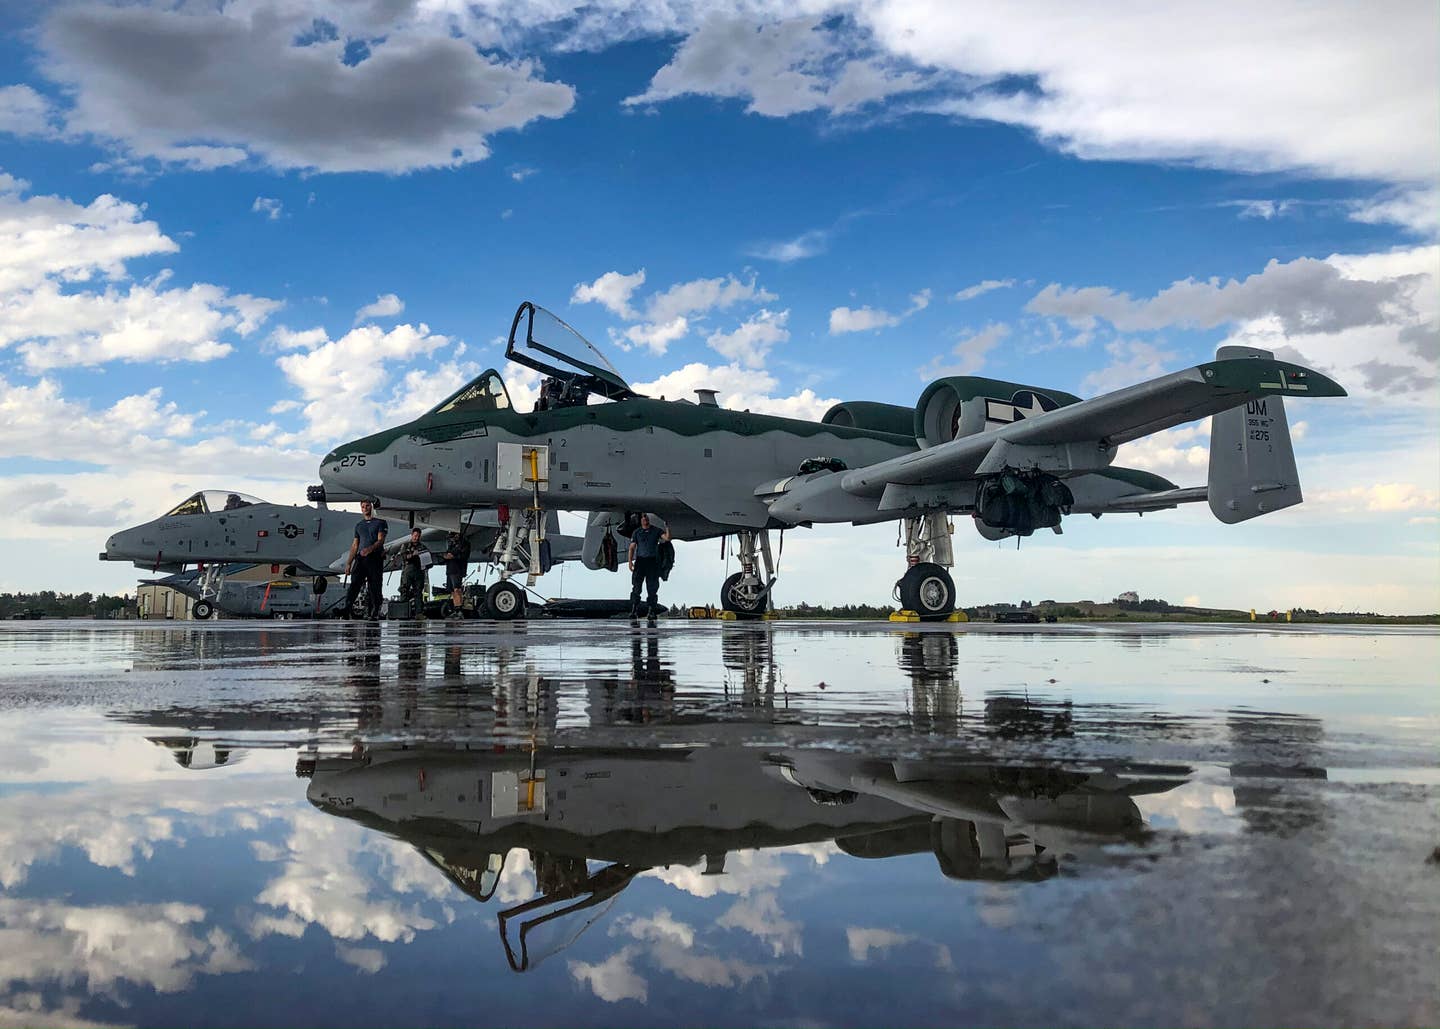 A-10Cs, assigned to the A-10 Demonstration Team, sit on the flight line at Wyoming Air National Guard, Wyoming, July 20, 2020. <em>U.S. Air Force photo by Senior Airman Kristine Legate</em>